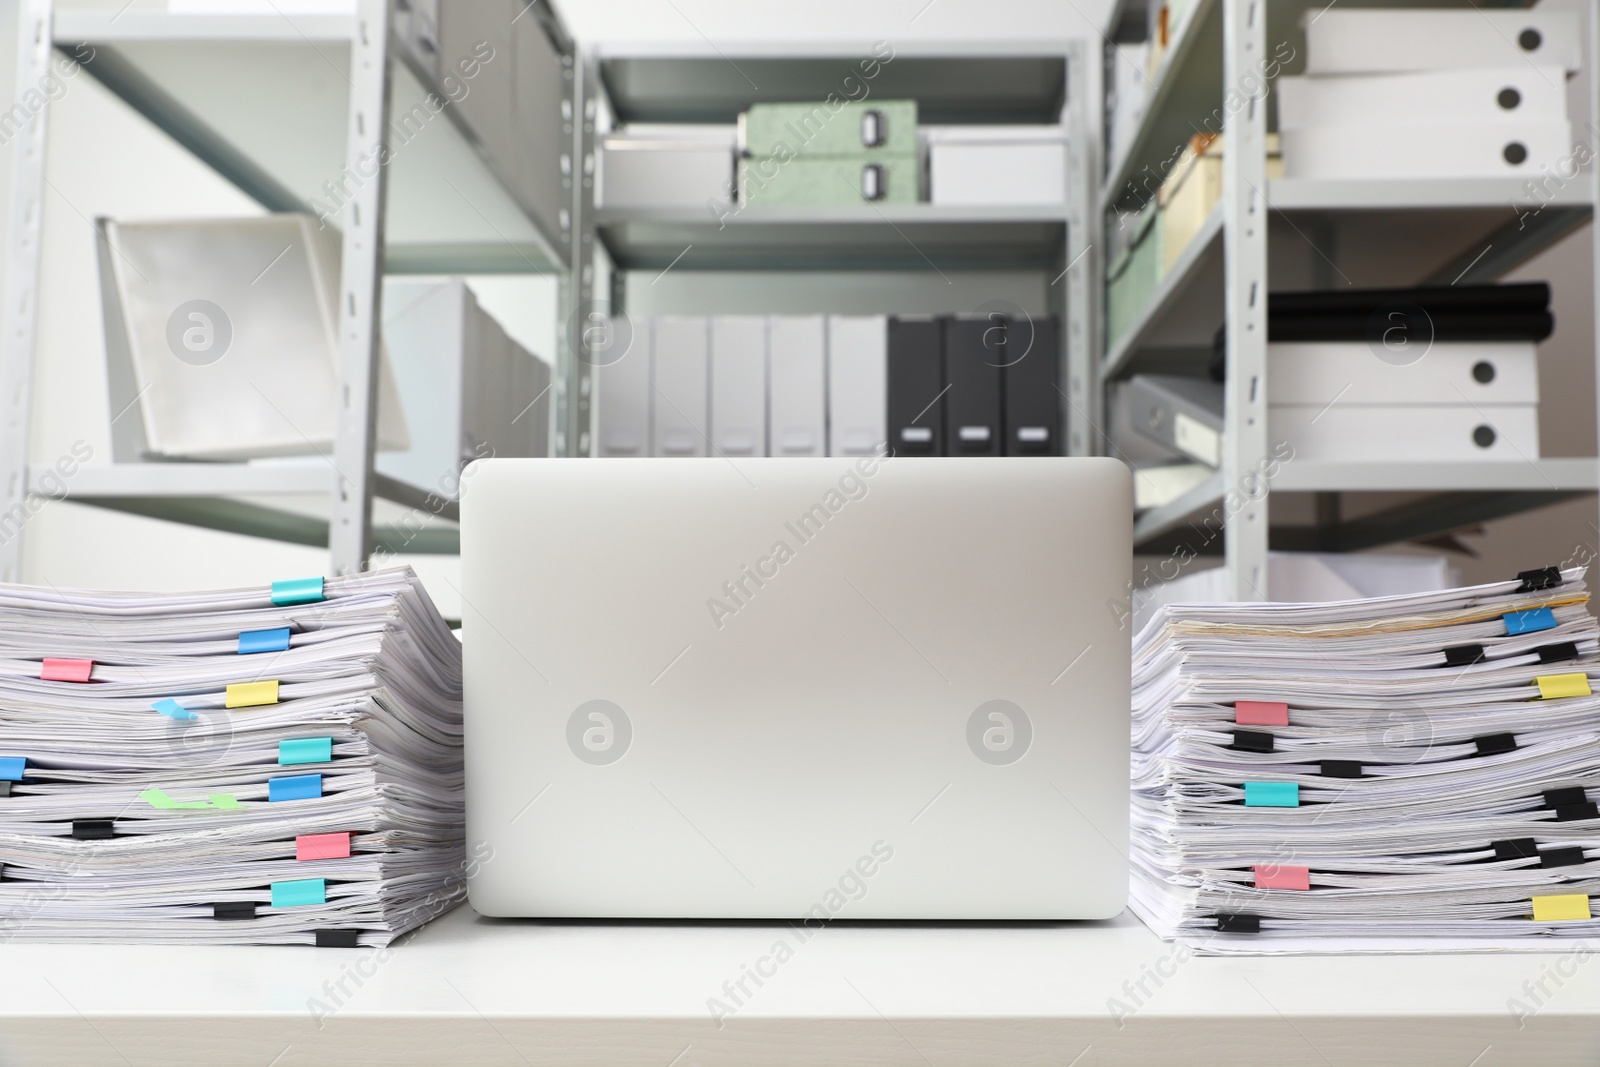 Photo of Laptop and documents on desk in office